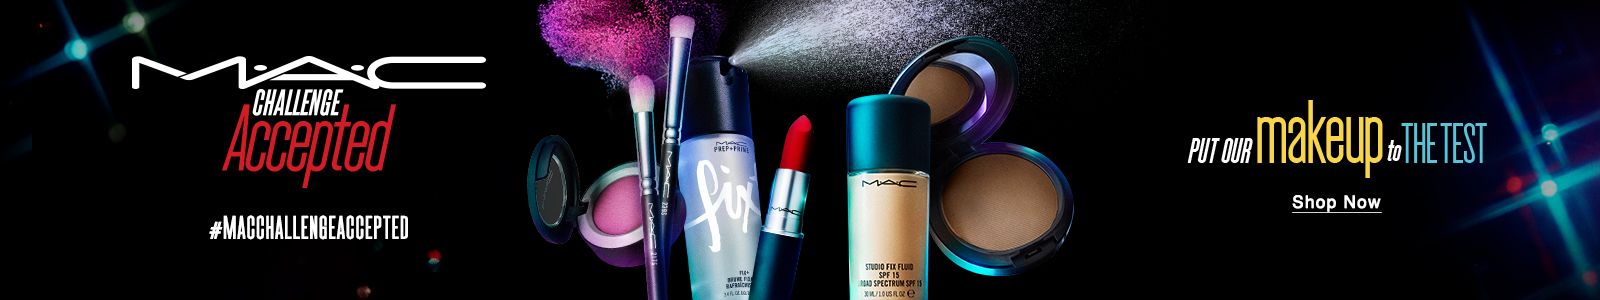 MAC Challenge Accepted #Macchallengeaccepted, Put our makeup to the test